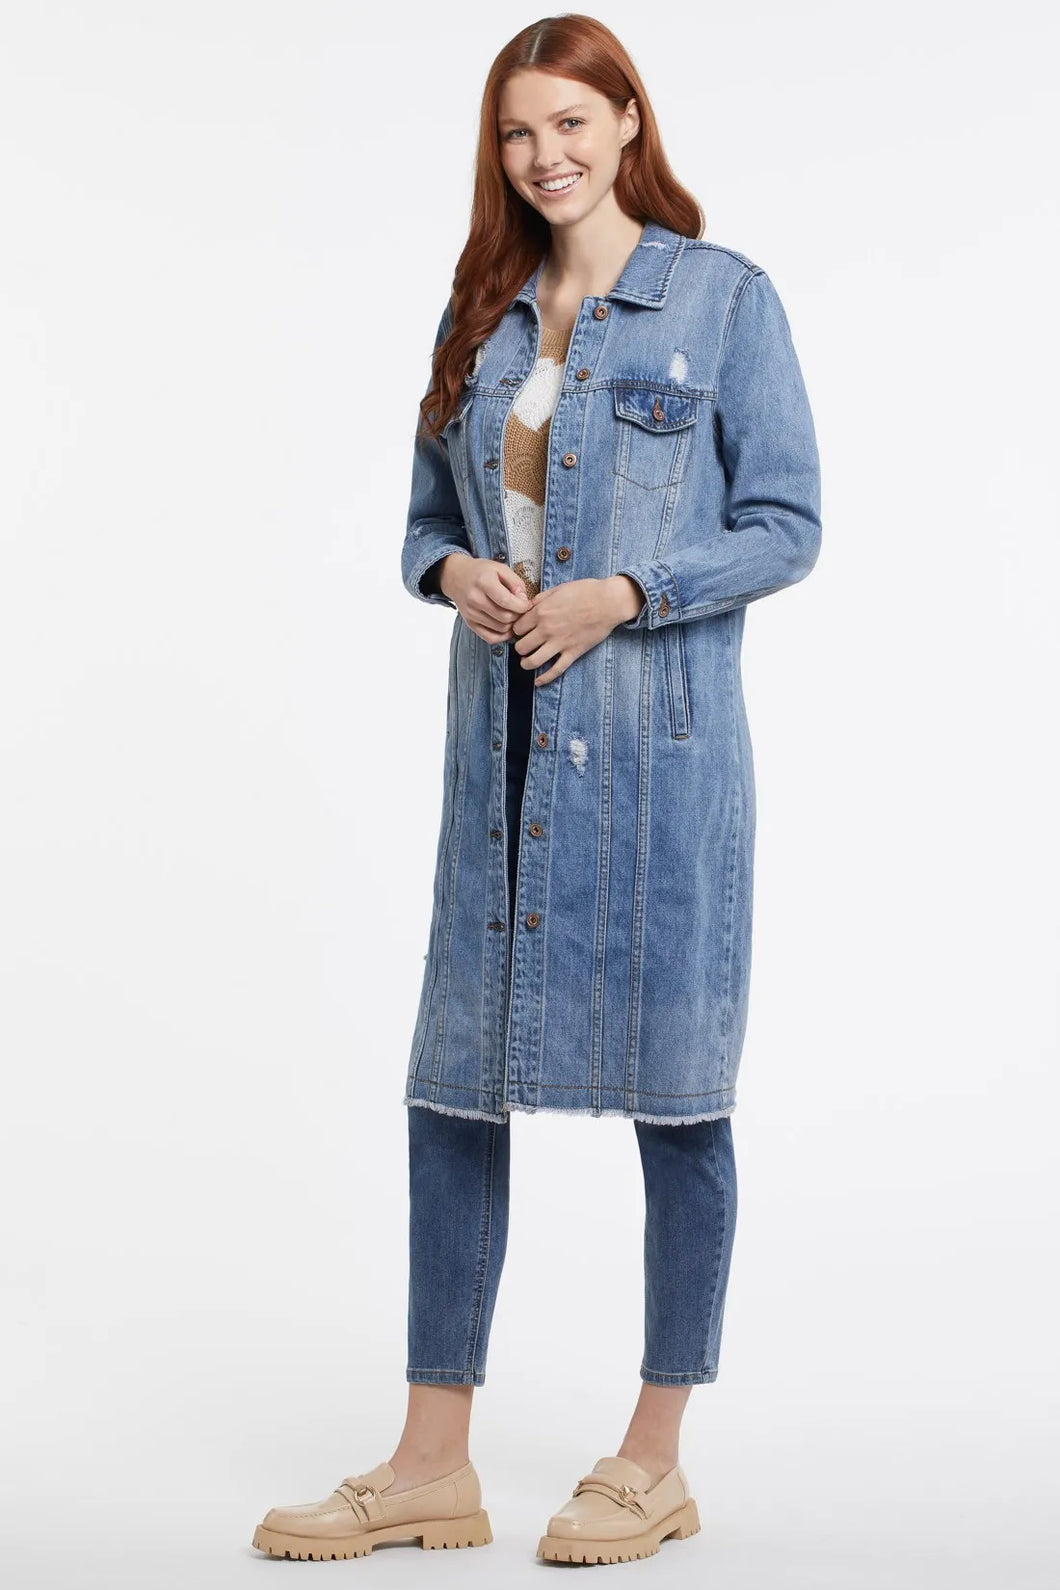 Distressed. Denim. Duster length. What more could we ask for in an updated twist on a classic jean jacket? Add unexpected flair to any casual look and watch the compliments pour in, no matter how you style this effortless piece.